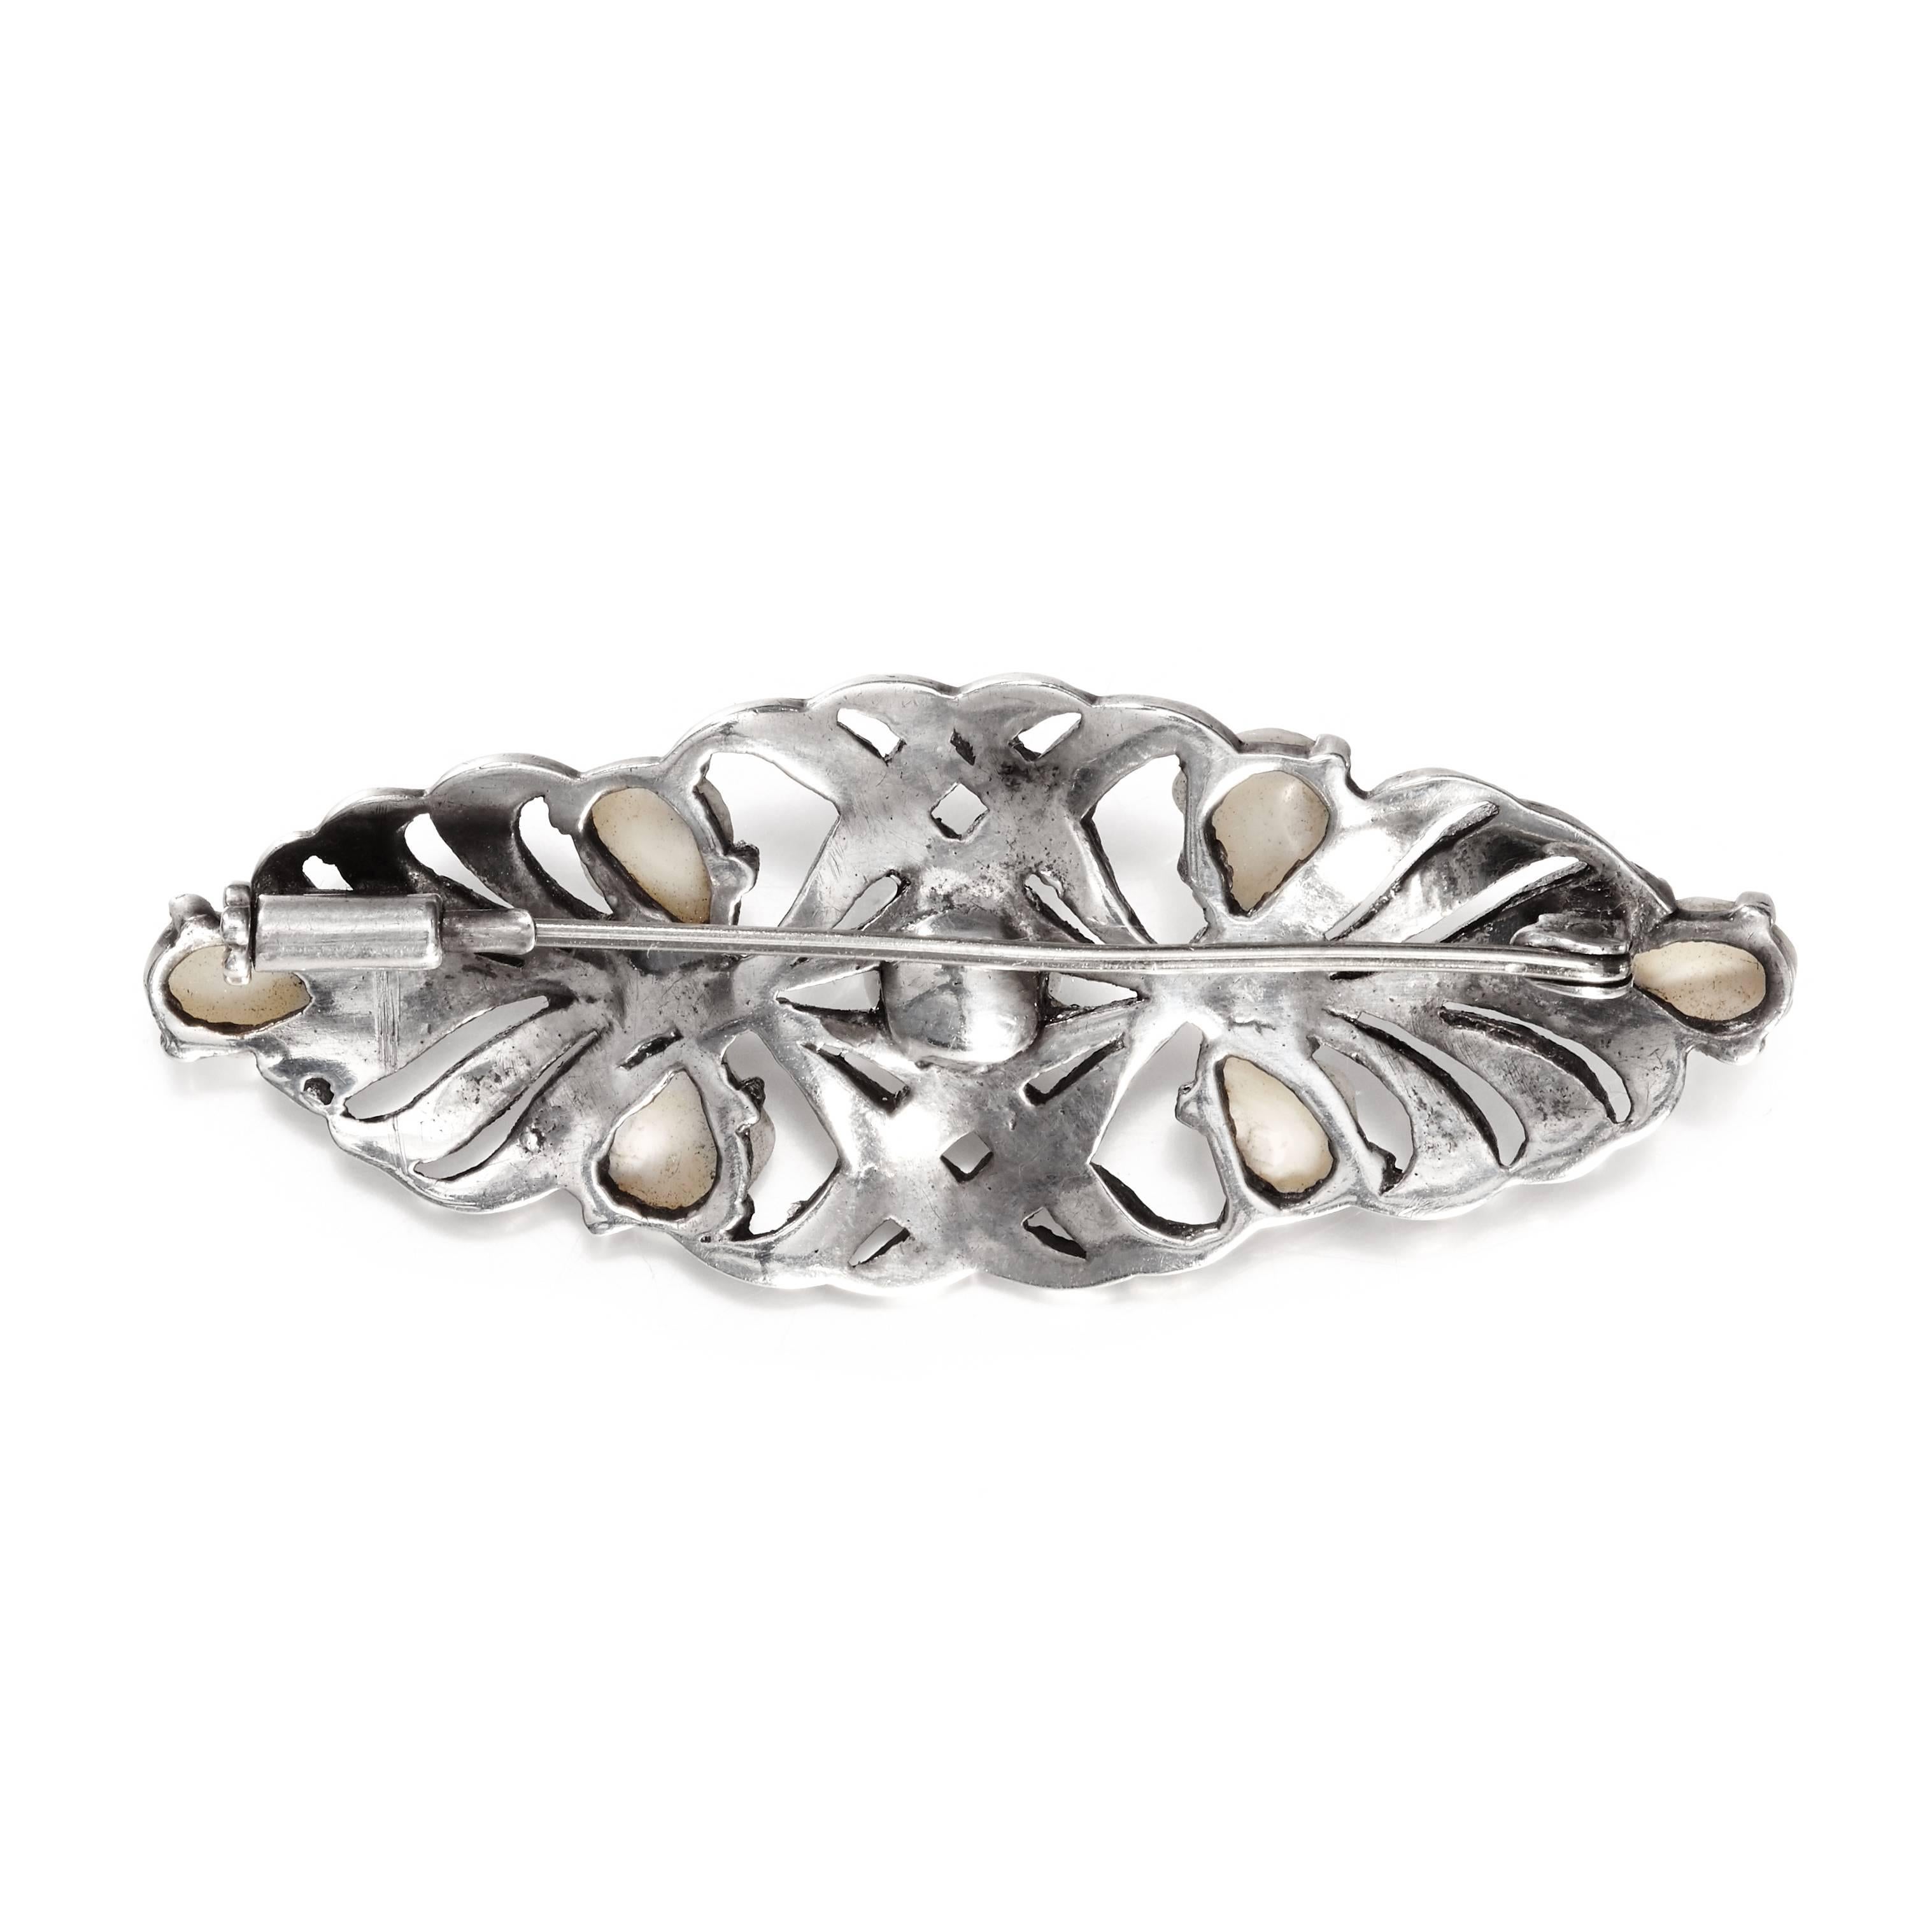 A beautiful openwork brooch in the shape of an elongated oval. The delicate lace like design is created on a dark oxidised silver base, set with marcasite and blister pearl accents around a central pearl focal.

The condition is excellent and the